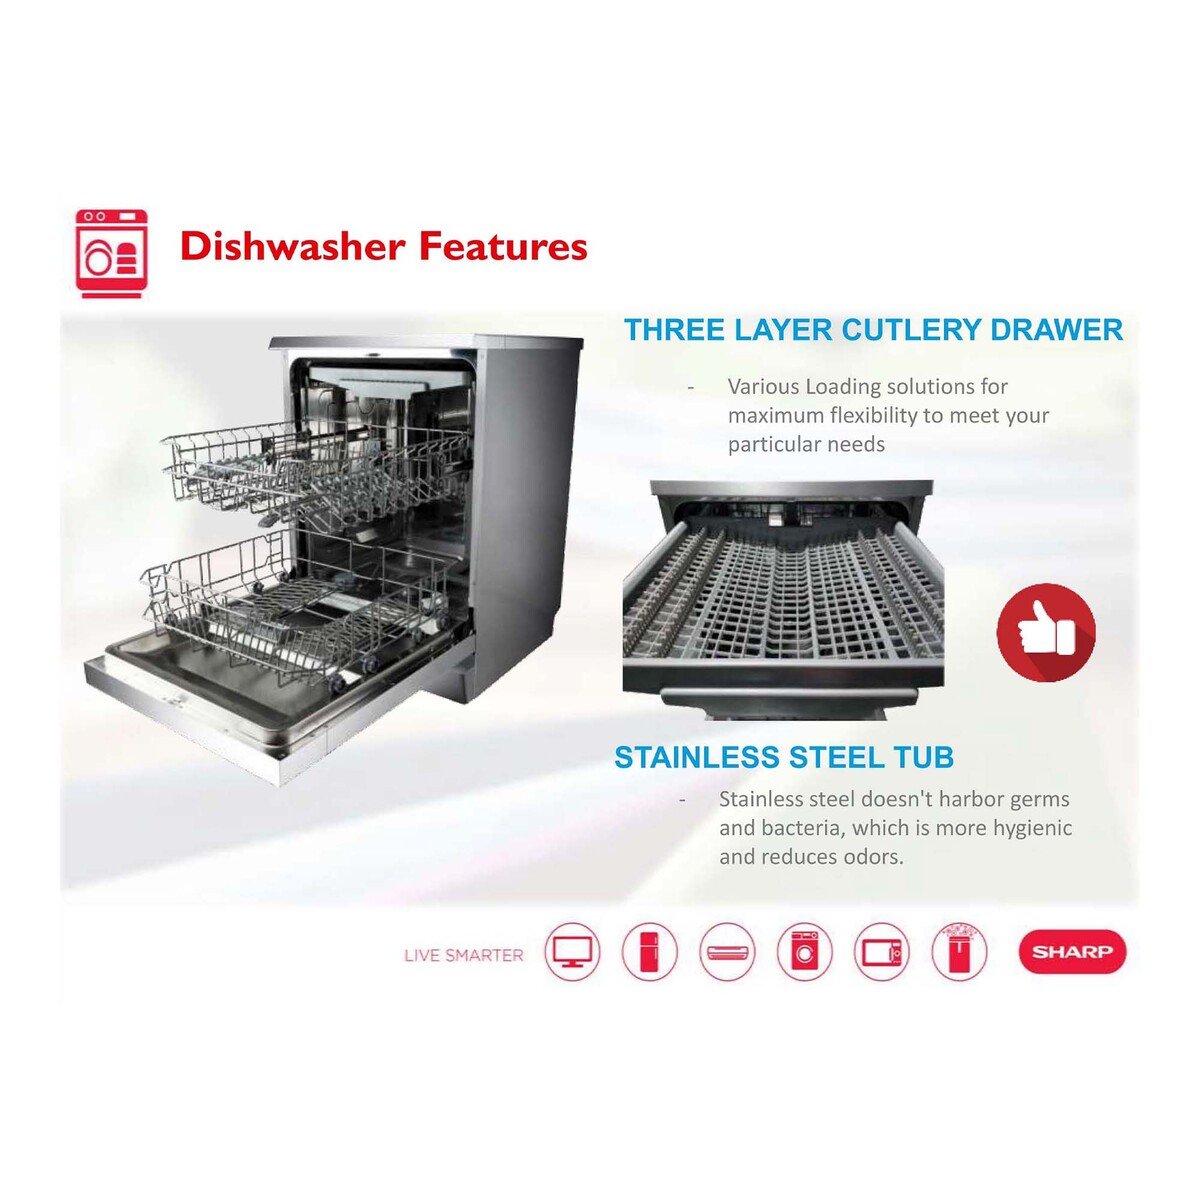 Sharp Free Standing Dishwasher QW-MA814-SS3 14 Place Settings 8 Programs Silver